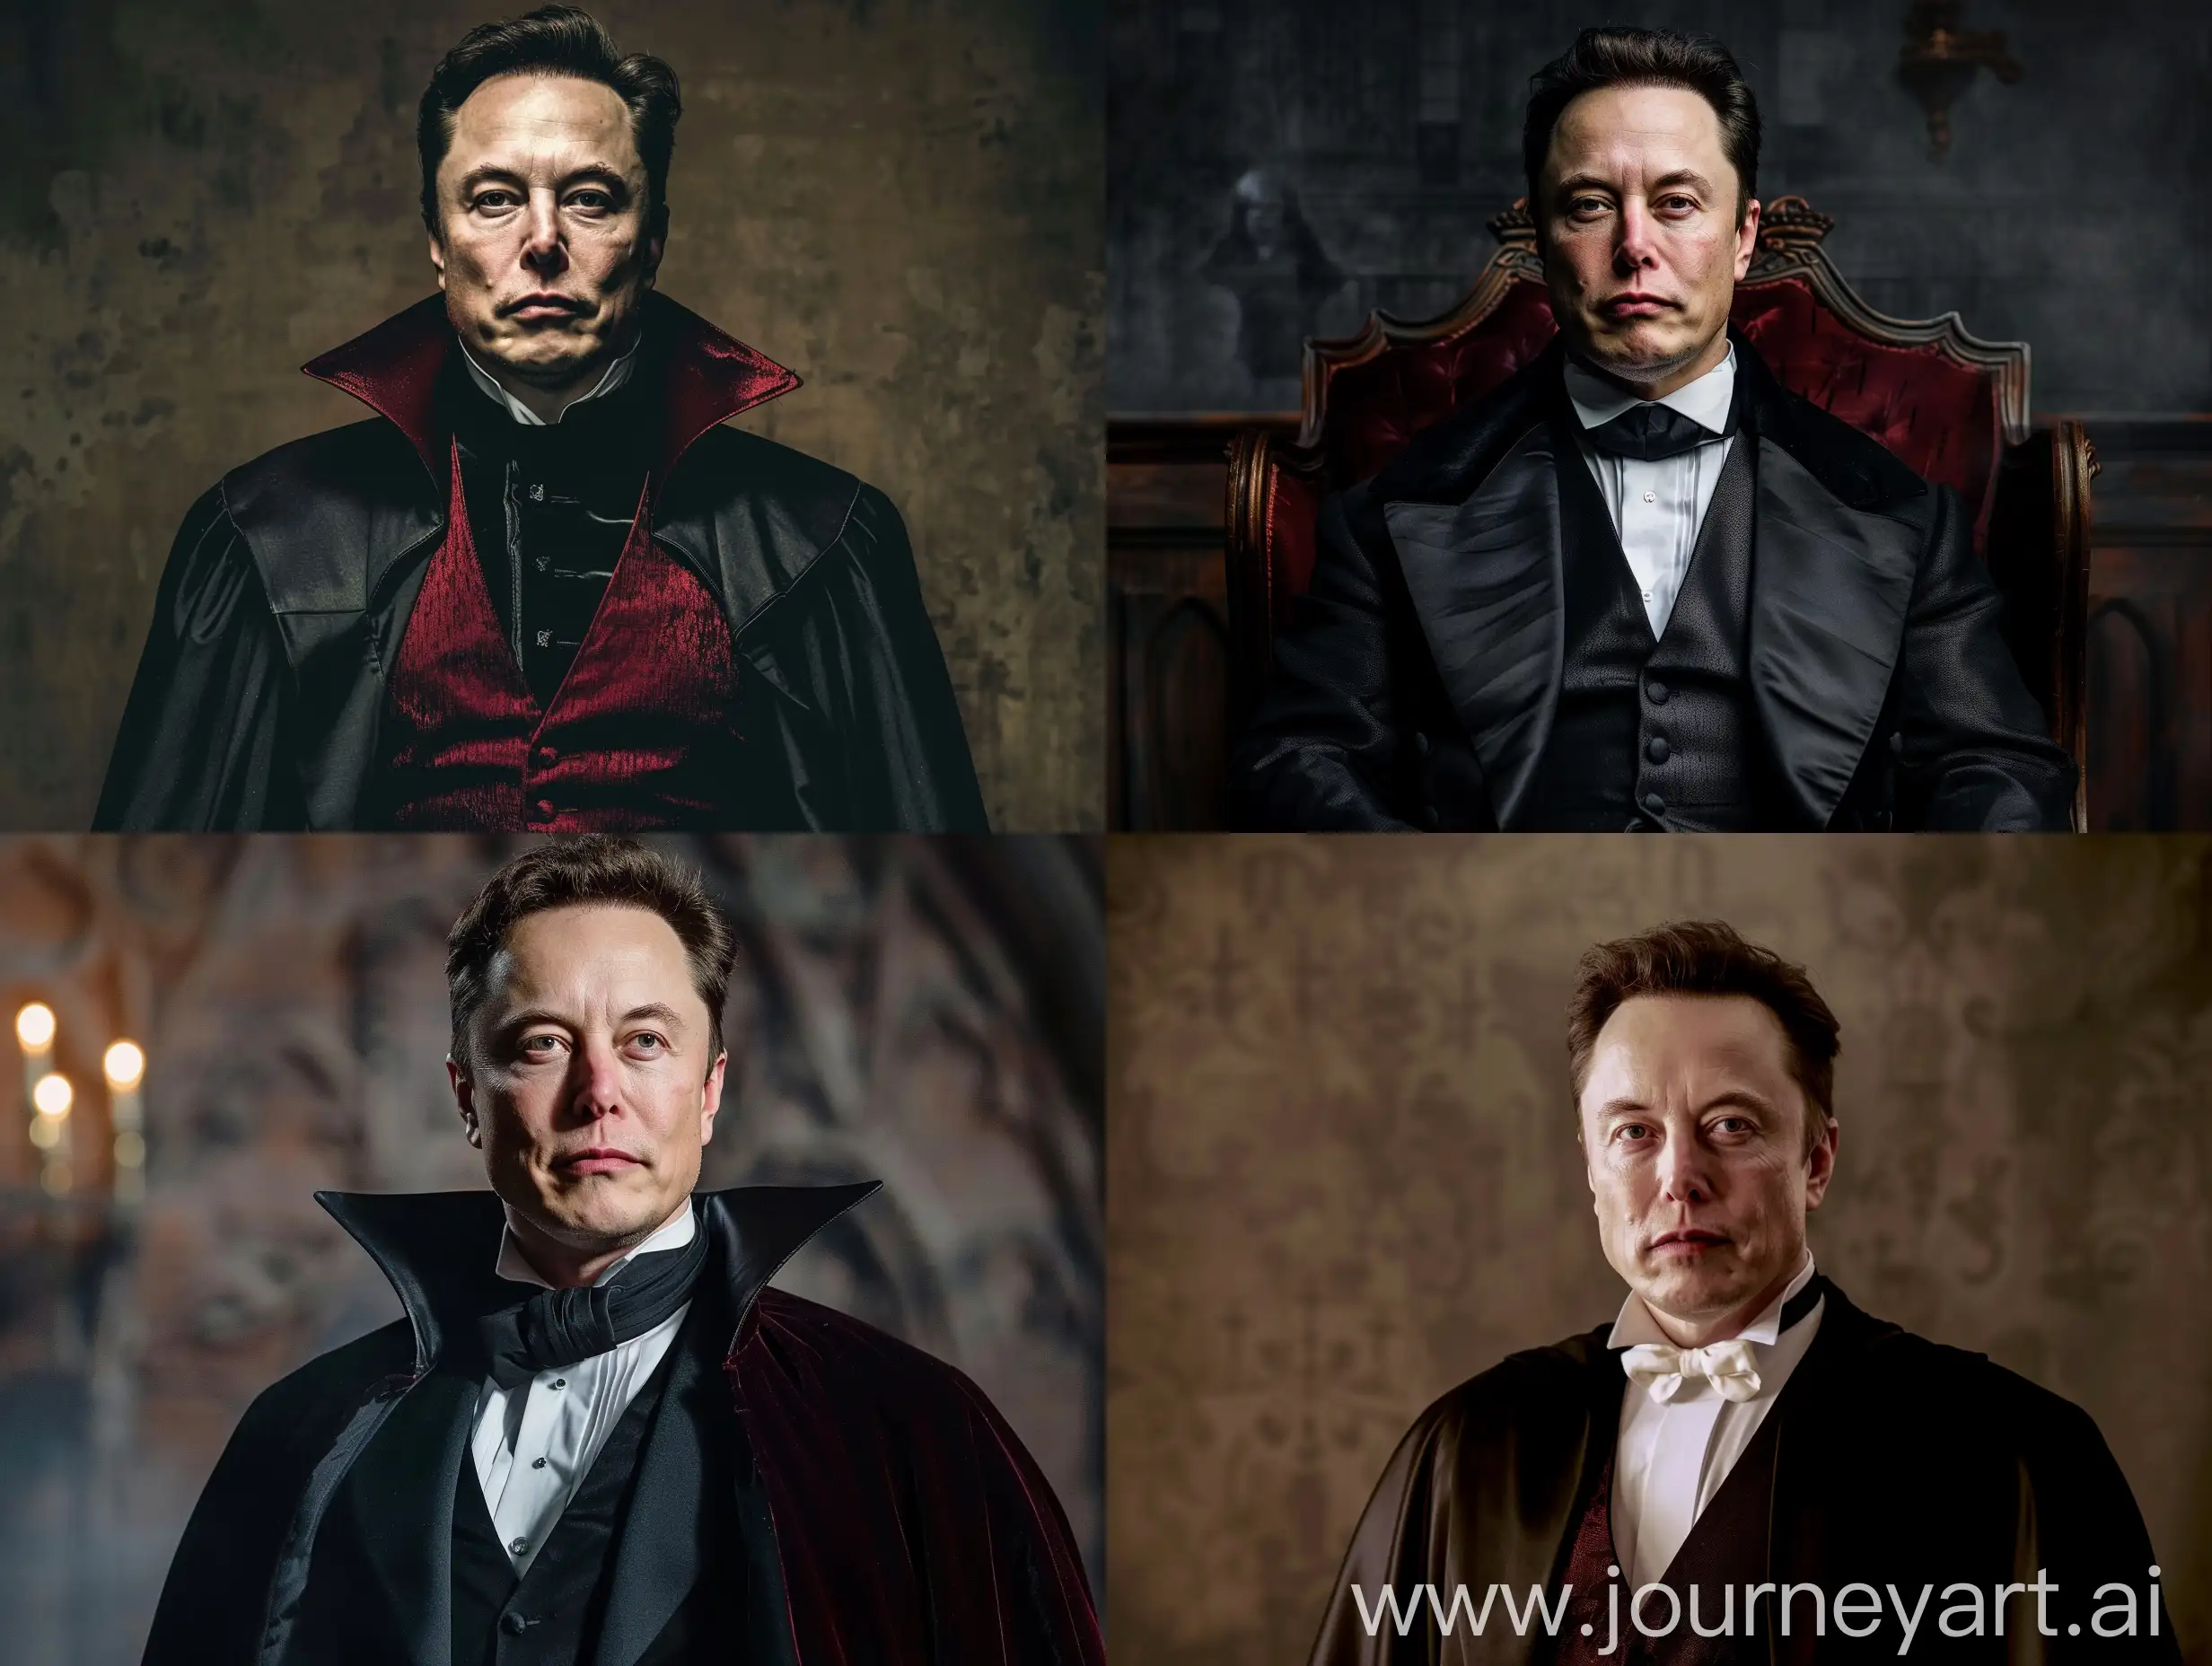 Elon-Musk-Portrayed-as-Dracula-Mysterious-Impersonation-in-Vintage-Style-Artwork